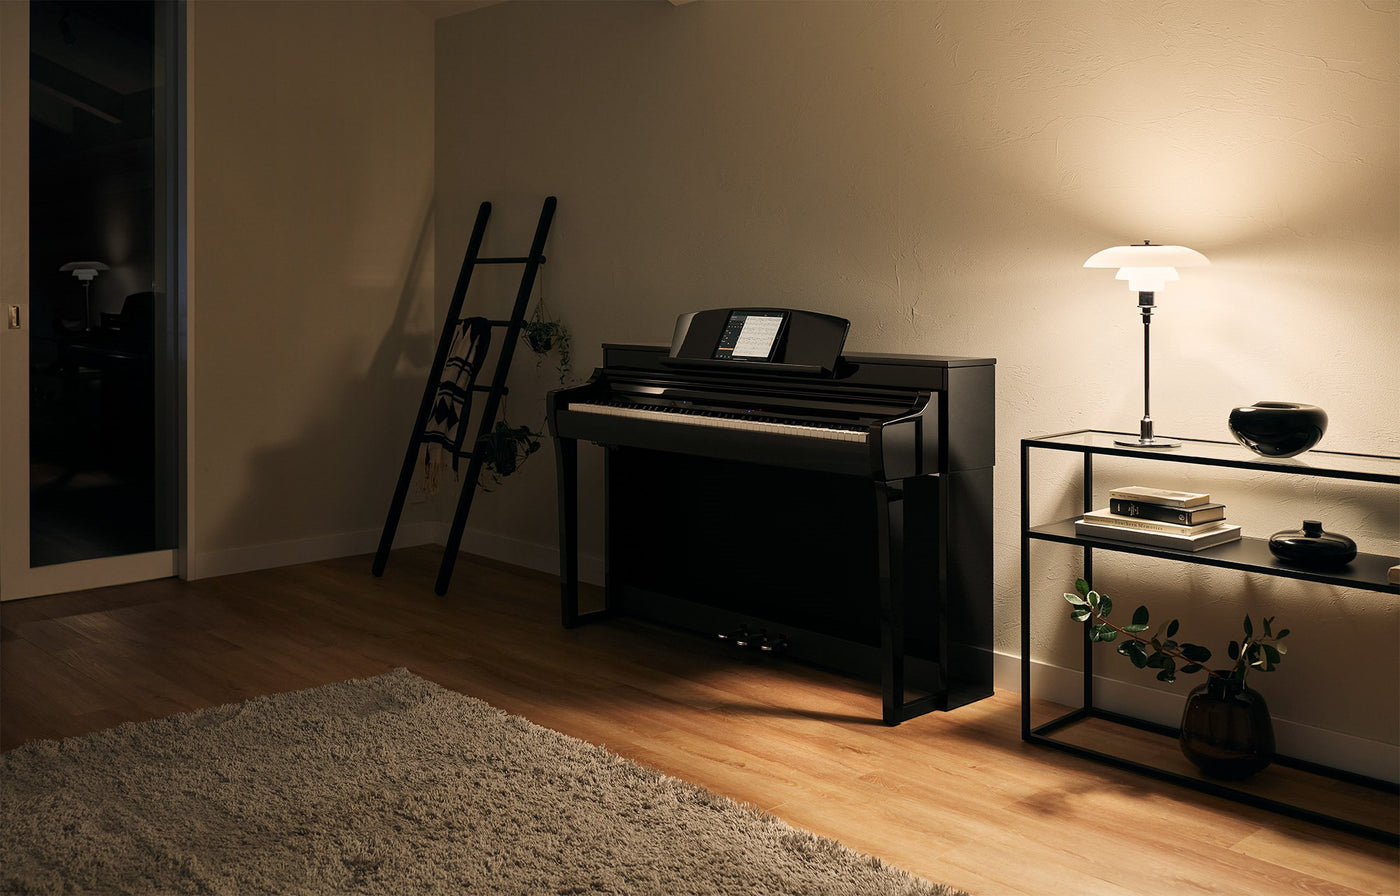 A modern digital piano positioned in a cozy living room setting, with a music stand displaying sheet music, indicating a space designed for piano practice and performance.